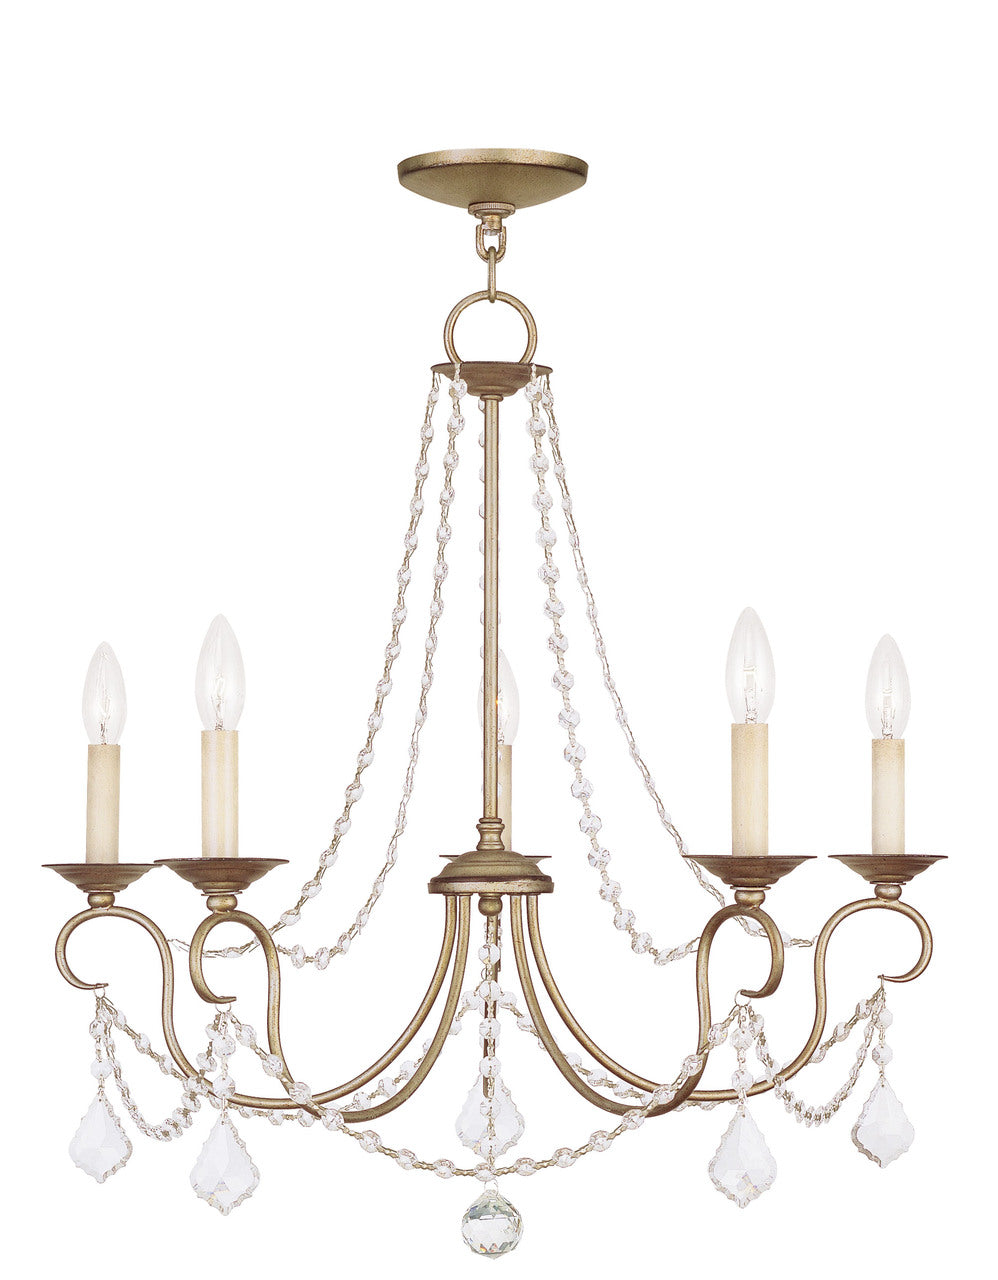 LIVEX Lighting 6515-73 Pennington Chandelier with Hand-Painted Antique Silver Leaves (5 Light)